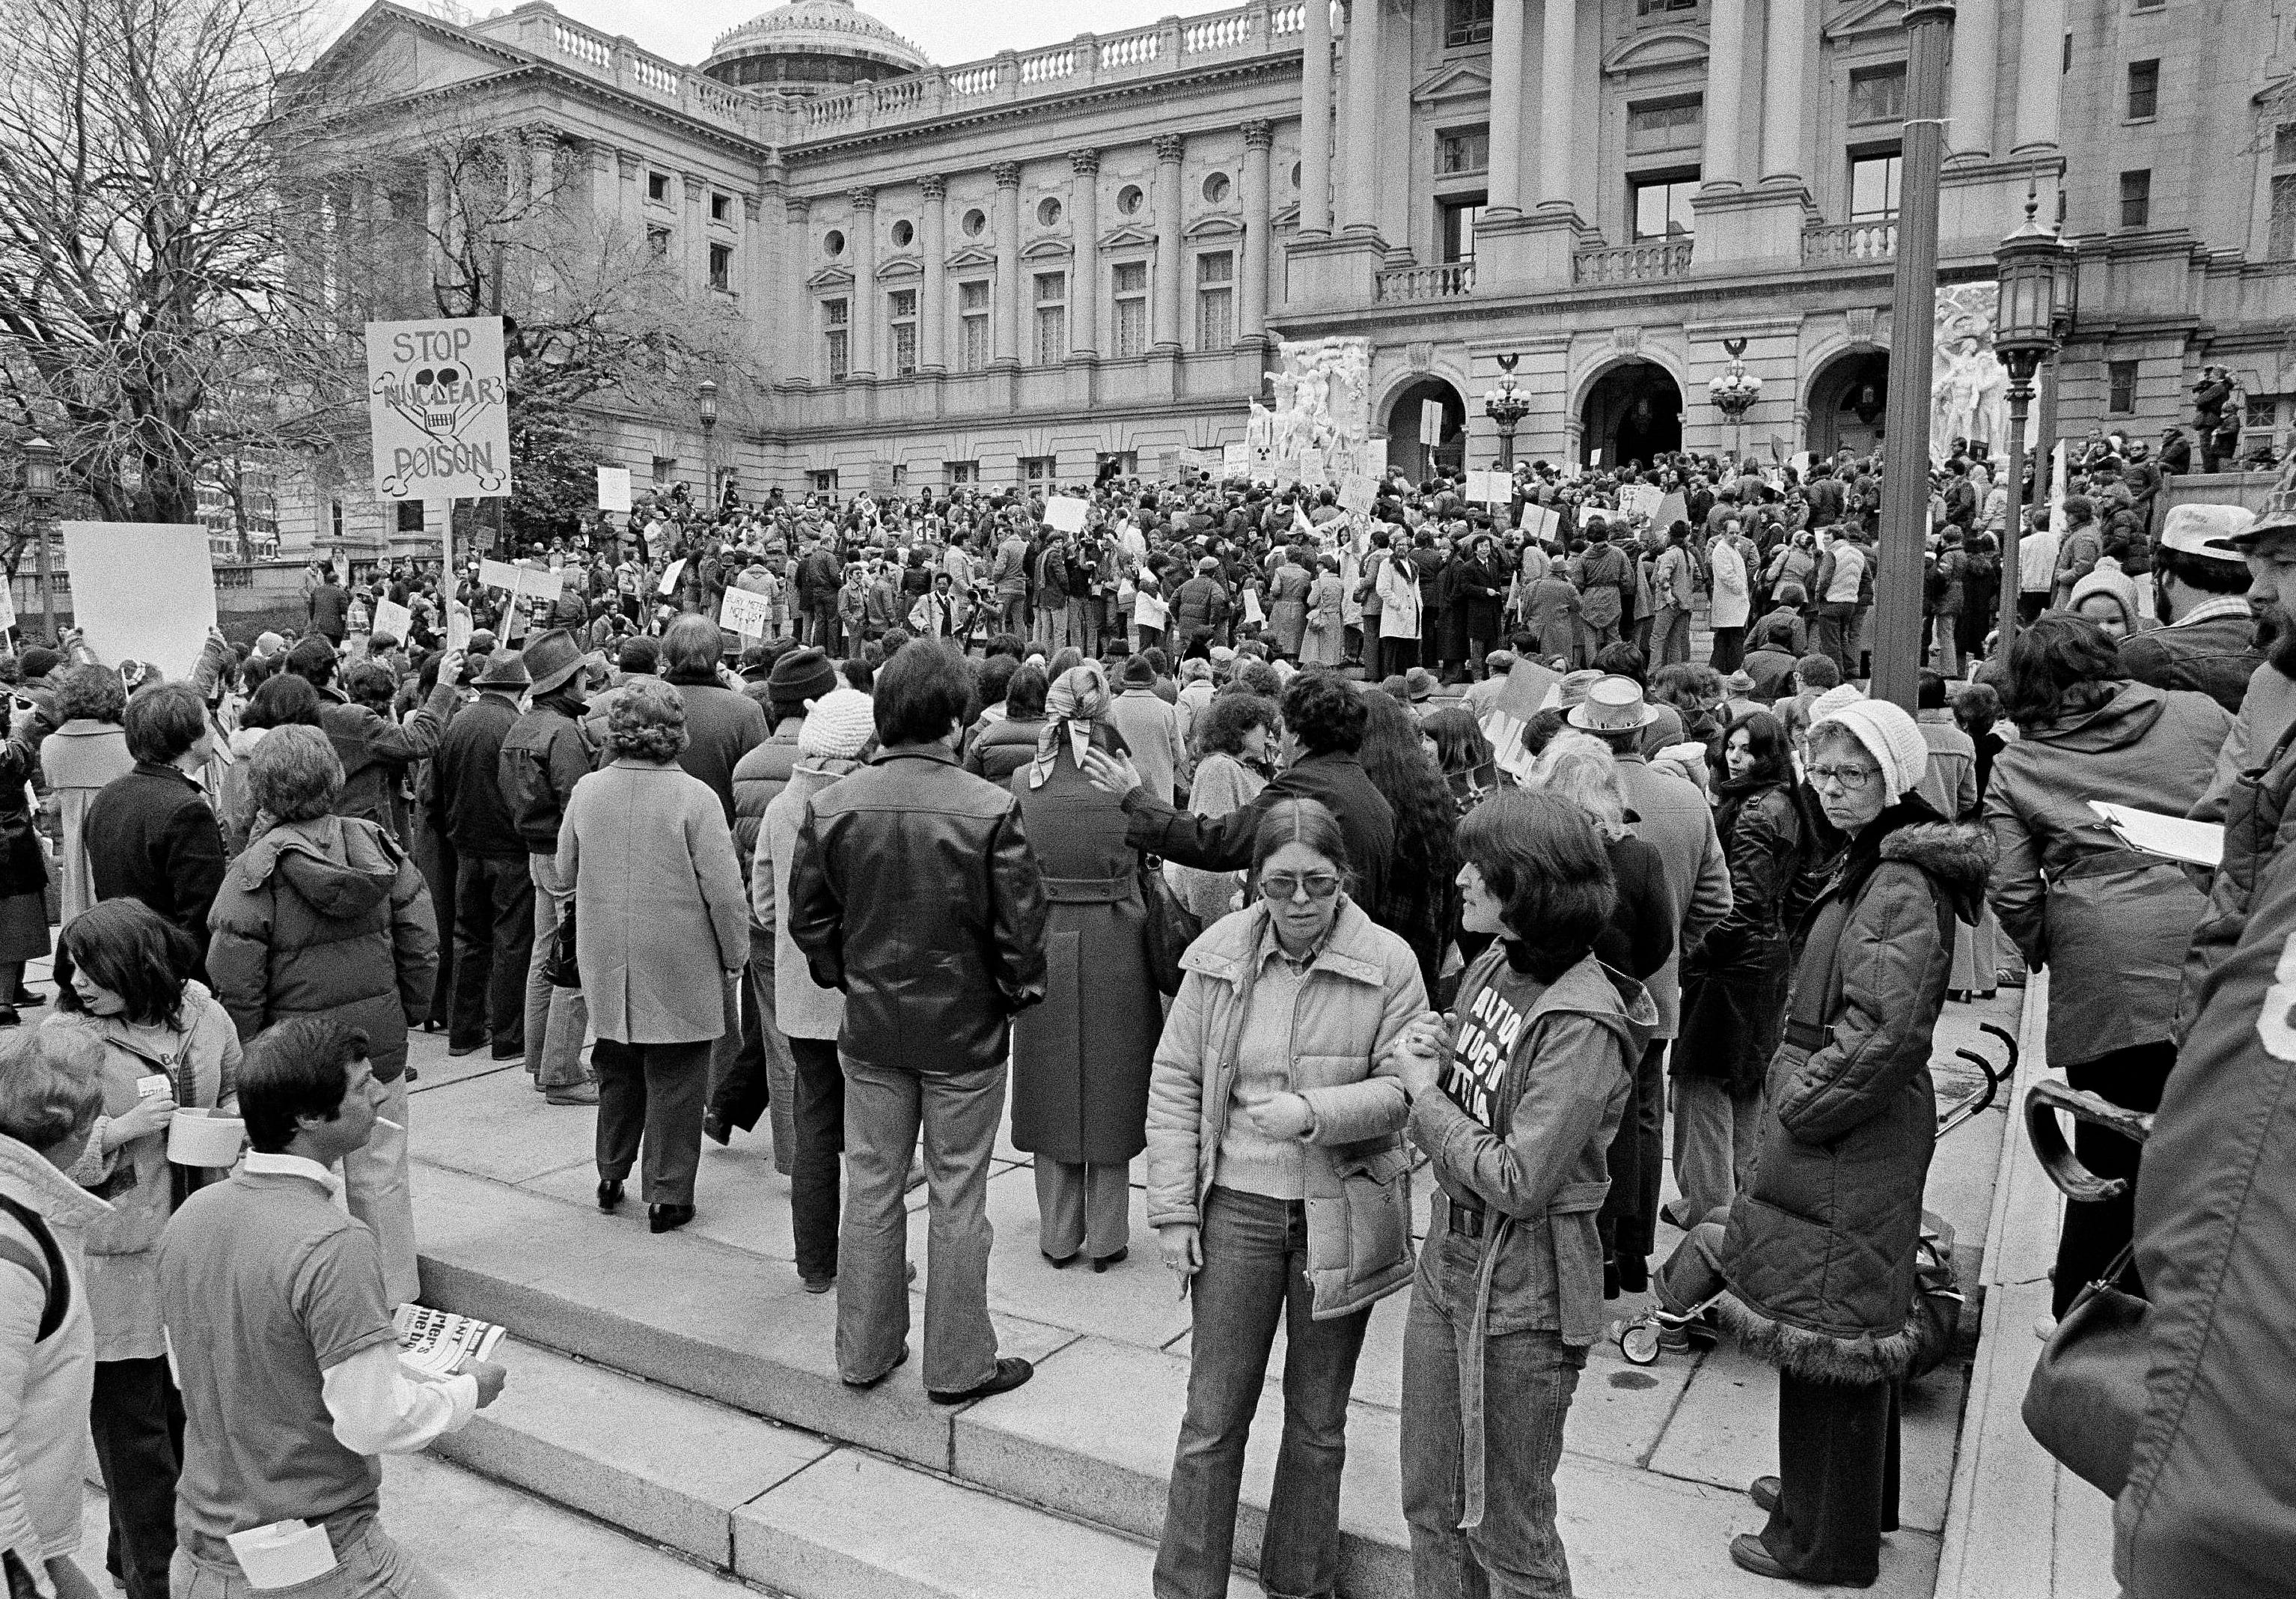 Anti-nuclear power plant demonstrators mass on the front steps of the State Capitol in Harrisburg, Penn., April 8, 1979, urging a shut-down of Three Mile Island nuclear power plant. The plant had an accident, causing radiation to leak into the atmosphere. (AP Photo/Paul Vathis)